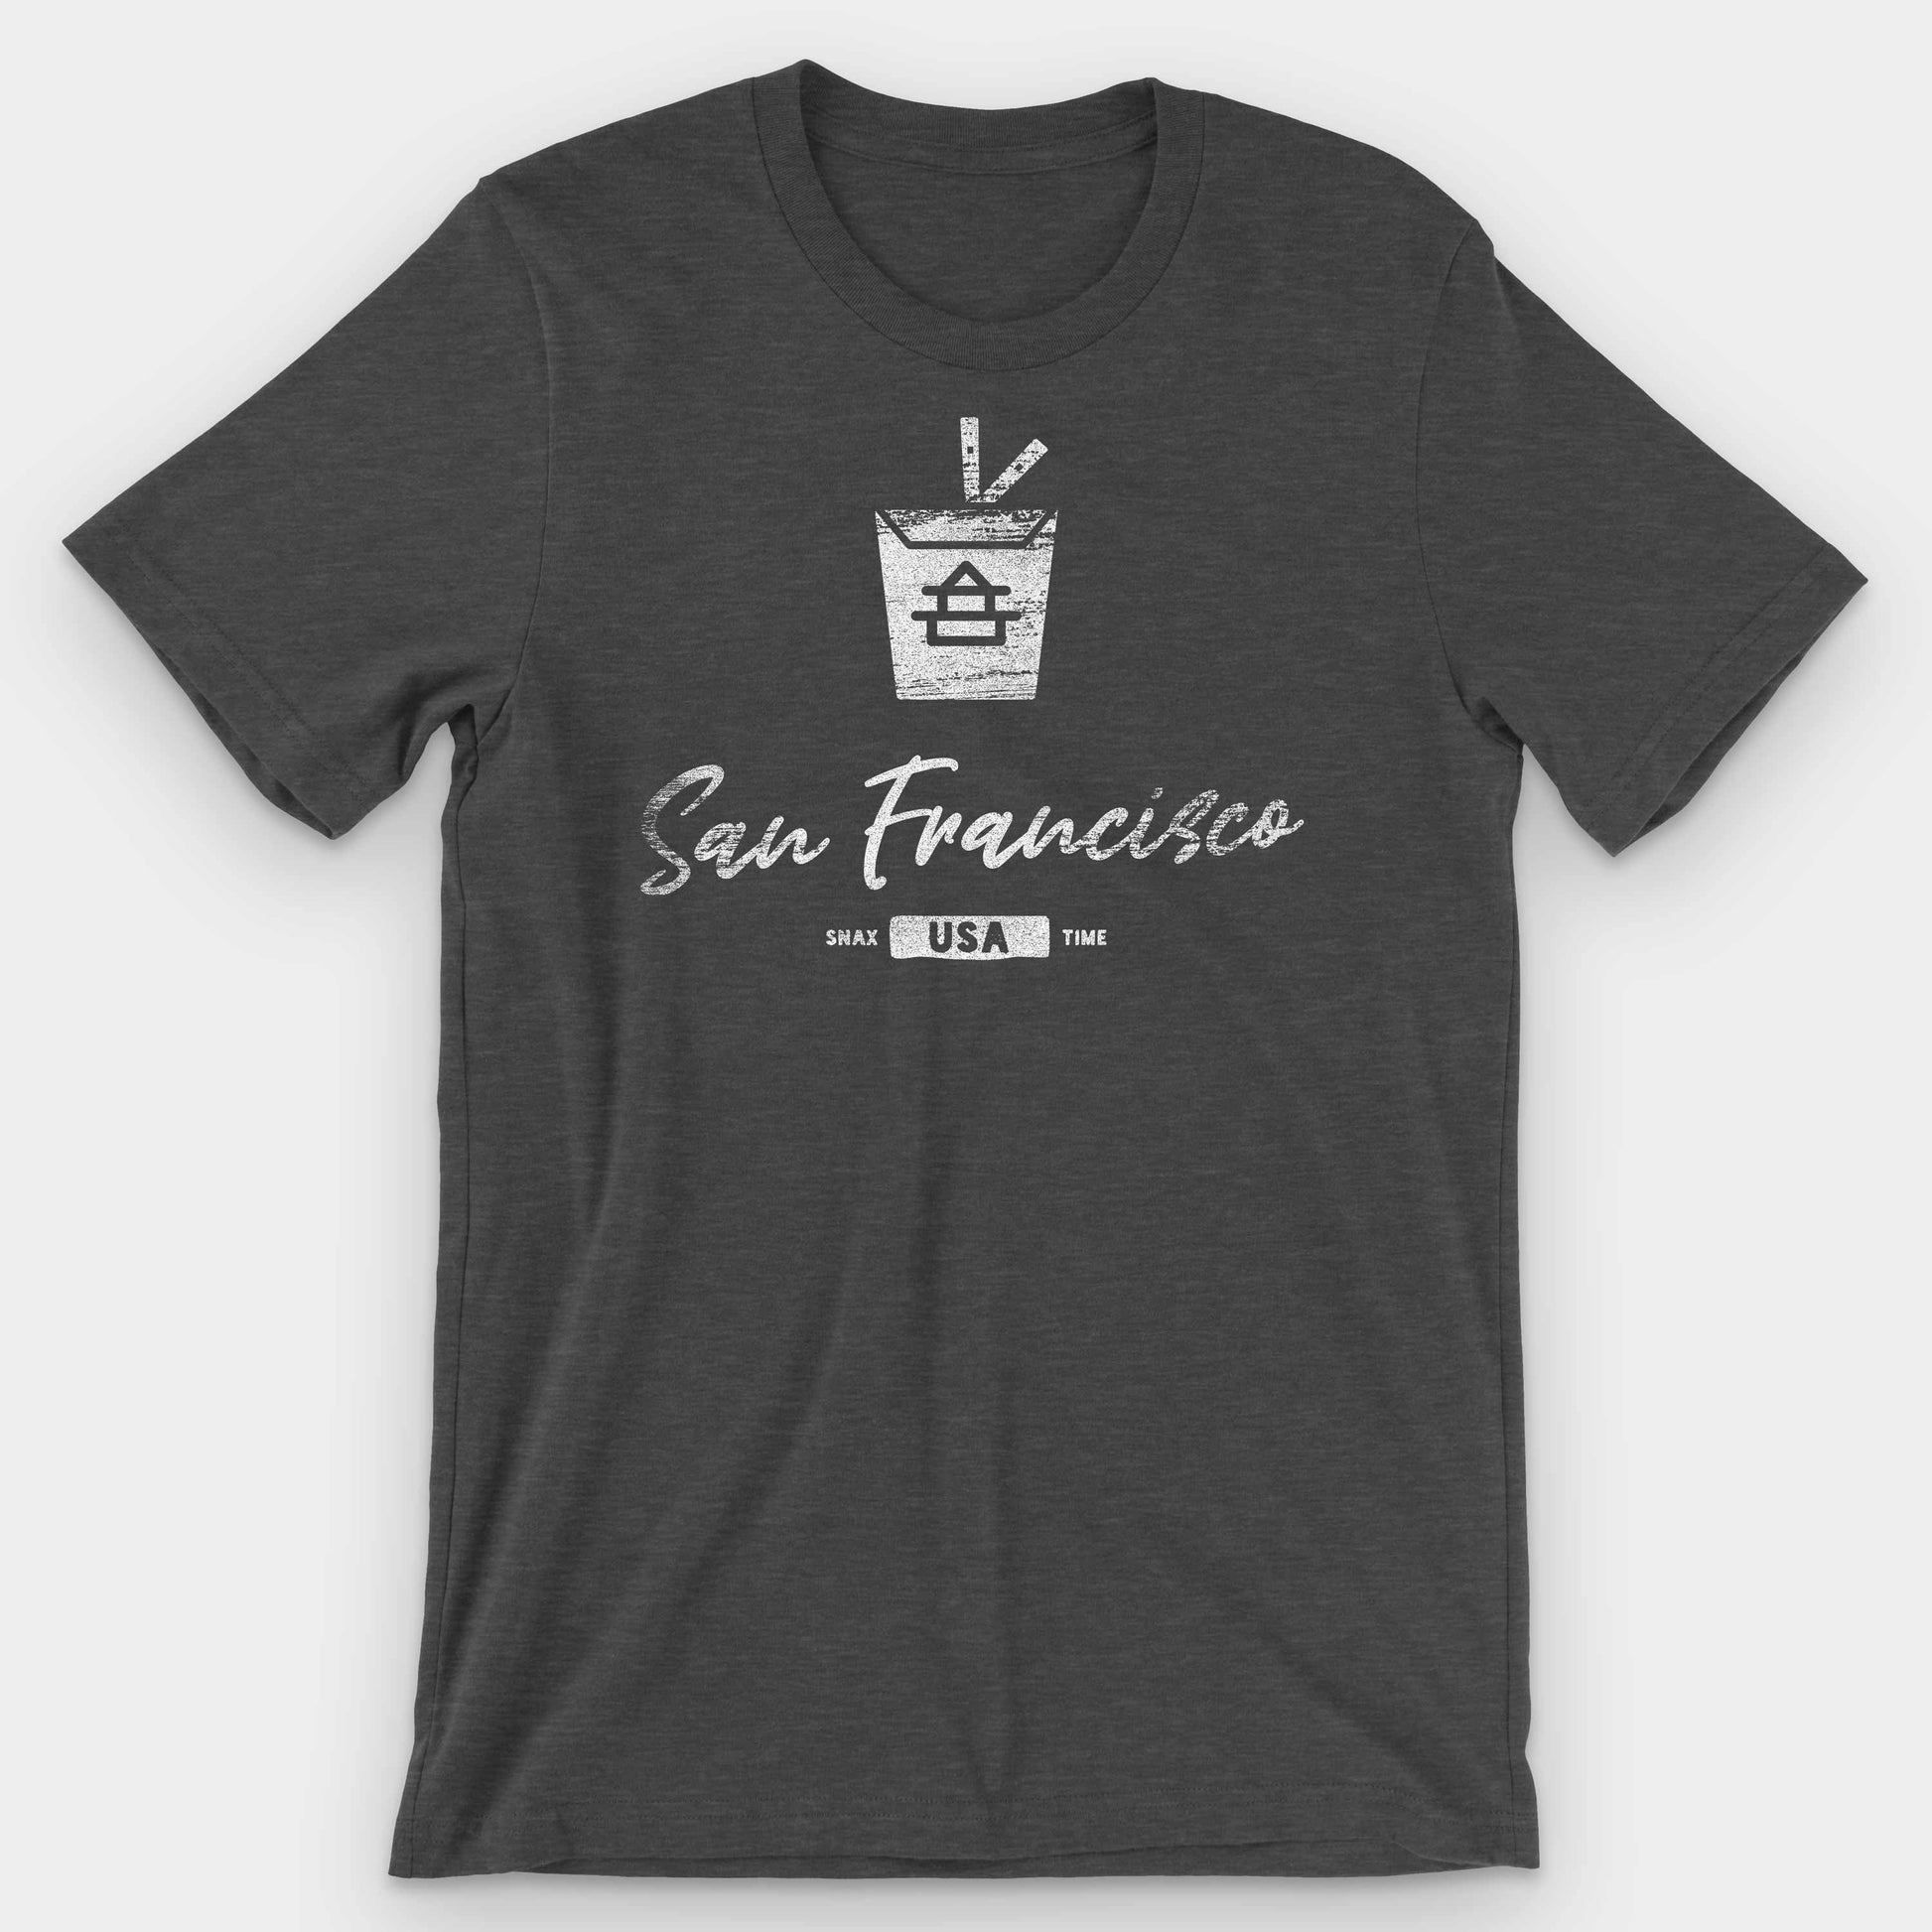 Dark Grey Heather San Francisco Chinese Takeout Graphic T-Shirt by Snaxtime